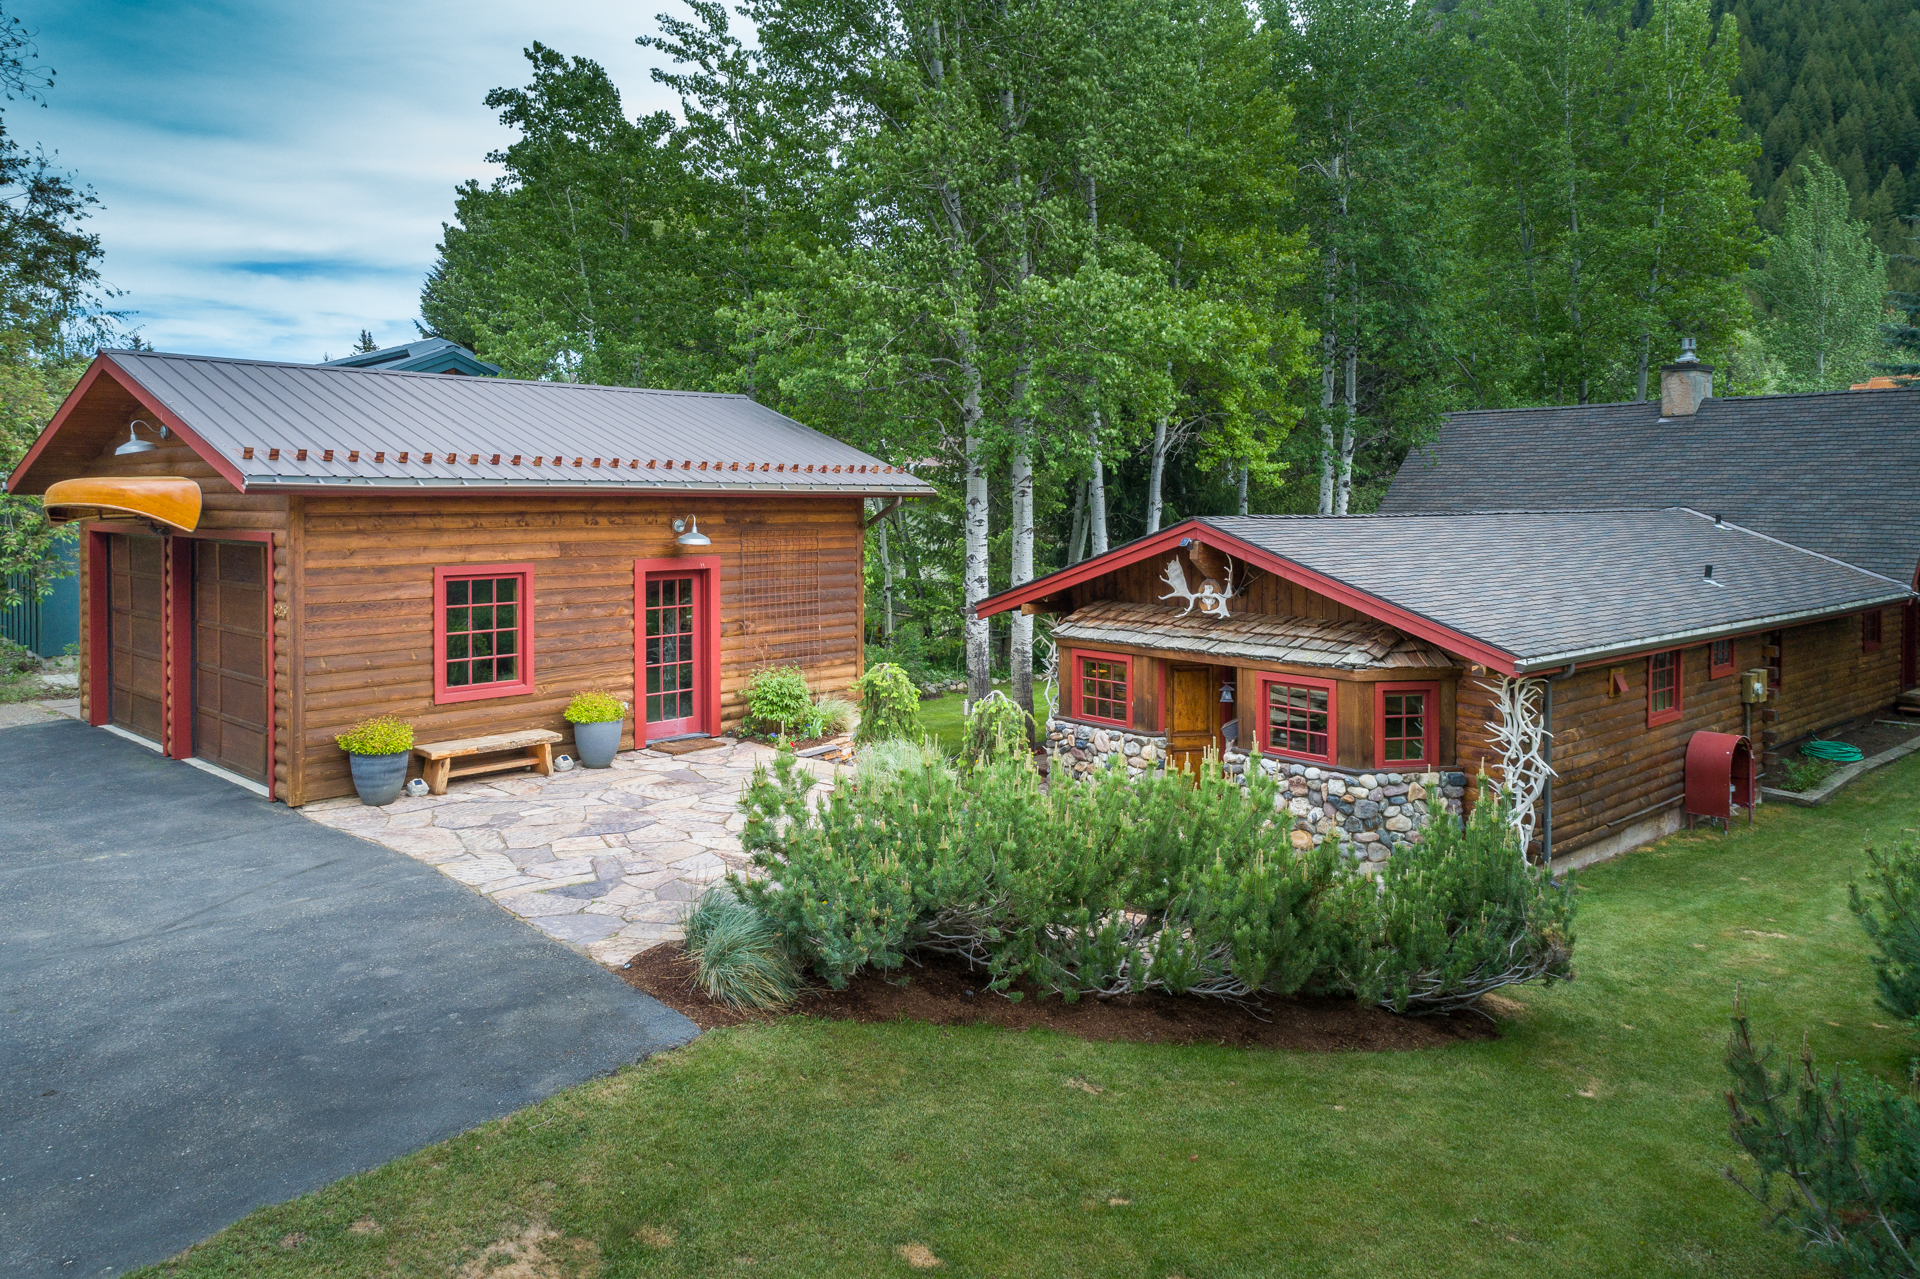 Featured Listing at 325 Bald Mountain Road in Ketchum, Idaho 